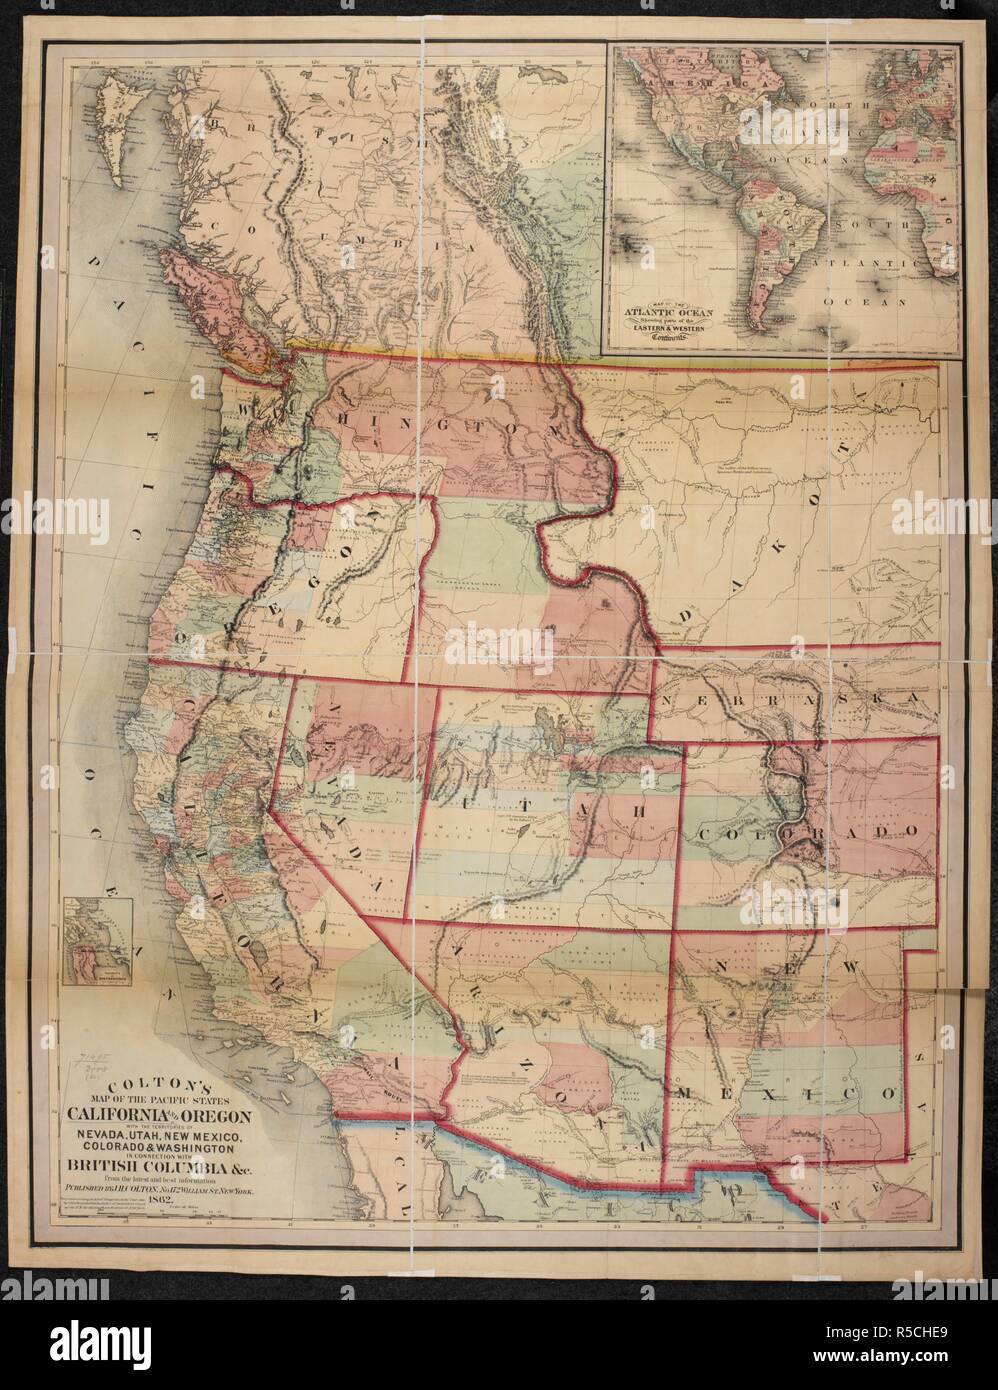 A map California and Oregon, with the territories of Nevada, Utah, New Mexico, Colorado and Washington. Colton's Map of the Pacific States California & Oregon with the territories of Nevada, Utah, New Mexico, Colorado & Washington in connection with British Columbia, etc. New York, 1862. Source: Maps 71495.(60.). Language: English. Stock Photo